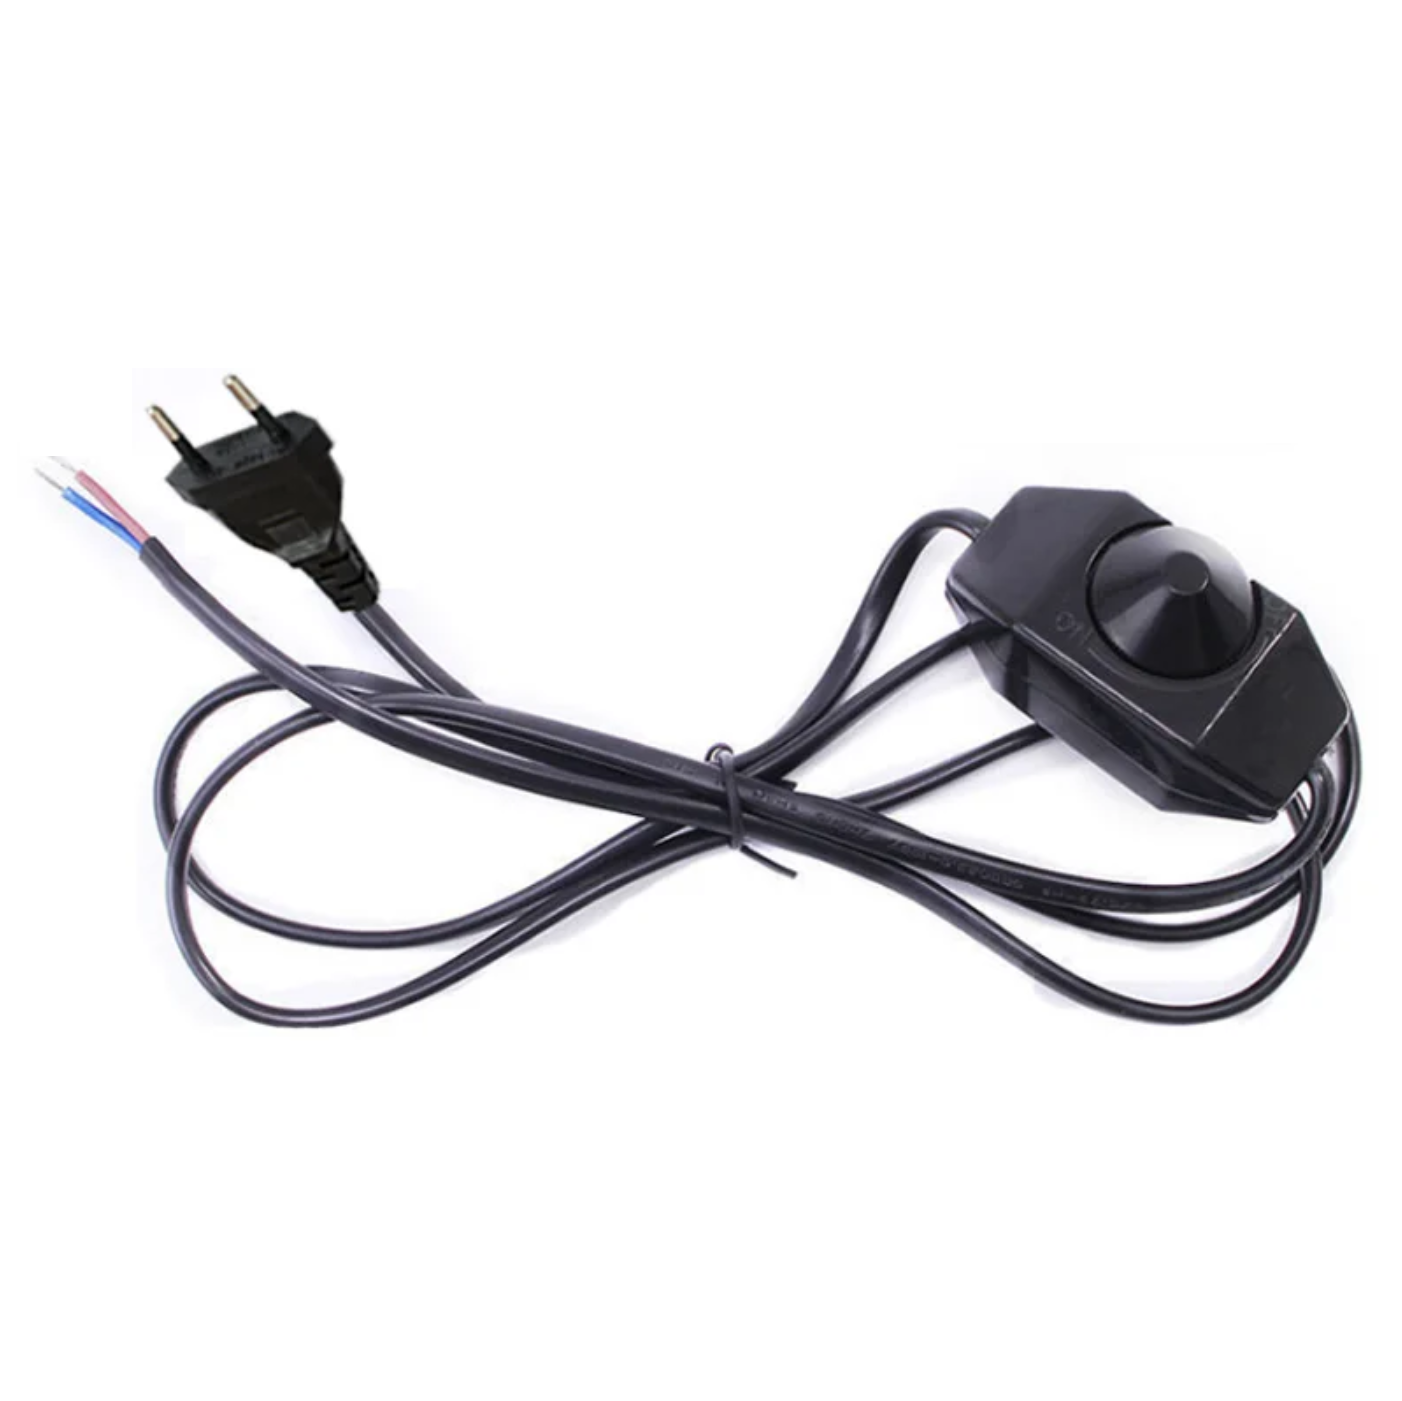 Dimmer Switch With 2-PIN Cable Plug 150CM BLACK